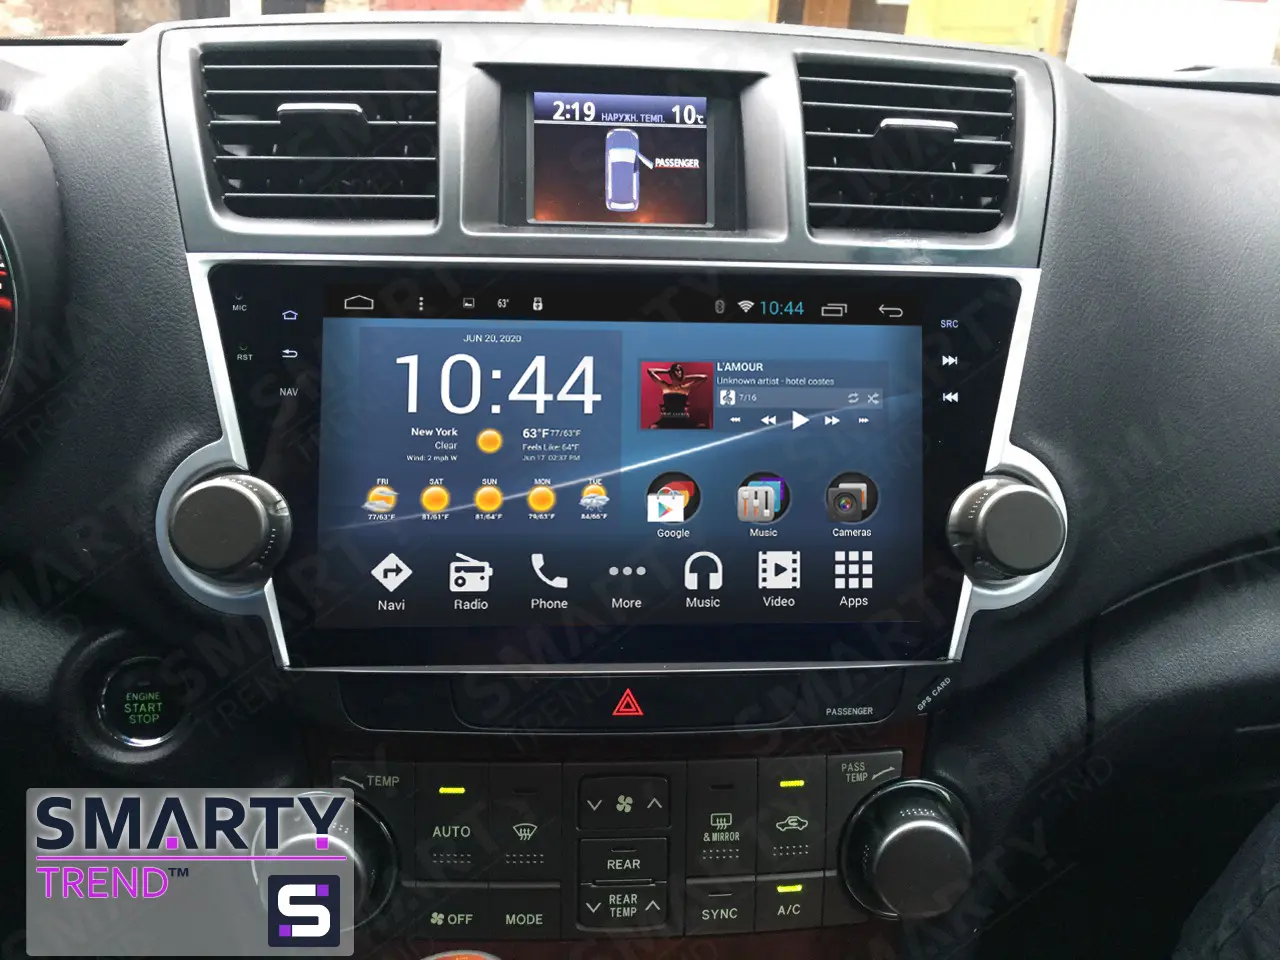 Toyota Highlander Android head unit , Full-touch 10.1 "Android 4.4.4 - SMARTY Trend.